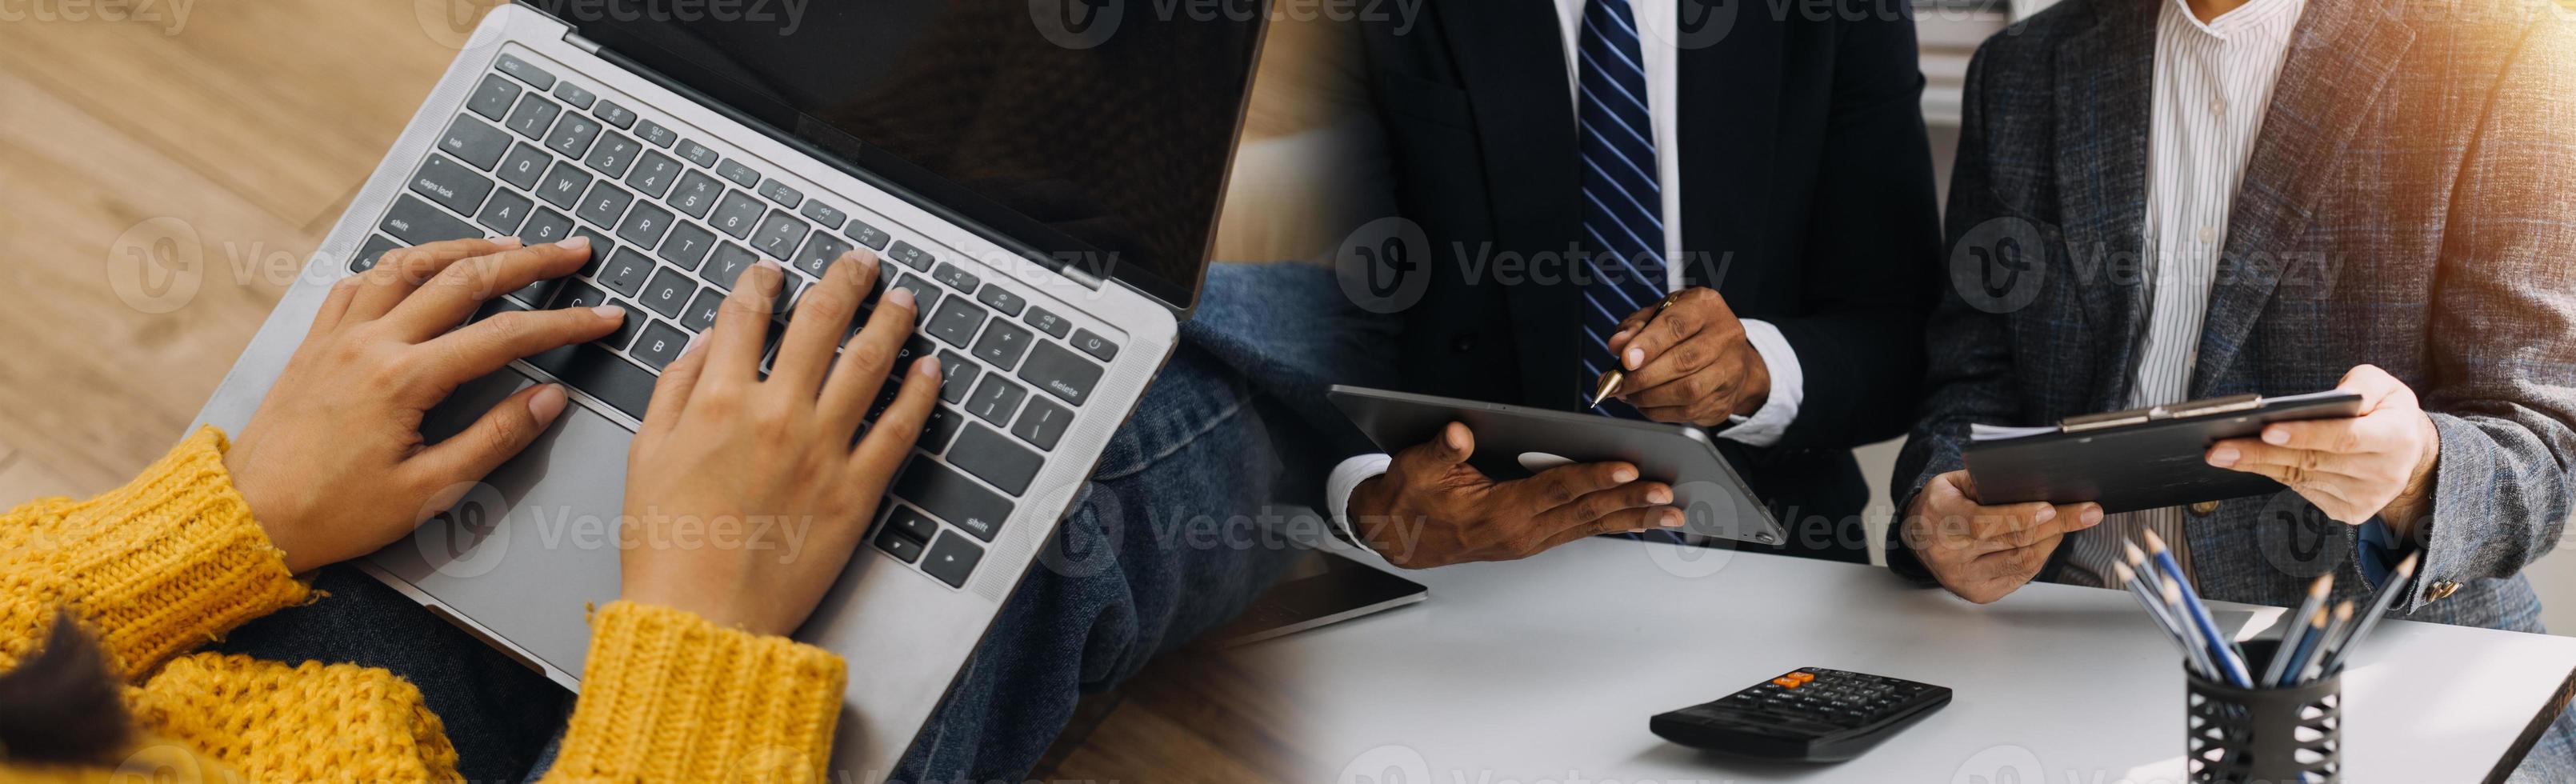 Team Of Business working at office with documents on his desk, doing planning analyzing the financial report, business plan investment, finance analysis concept photo